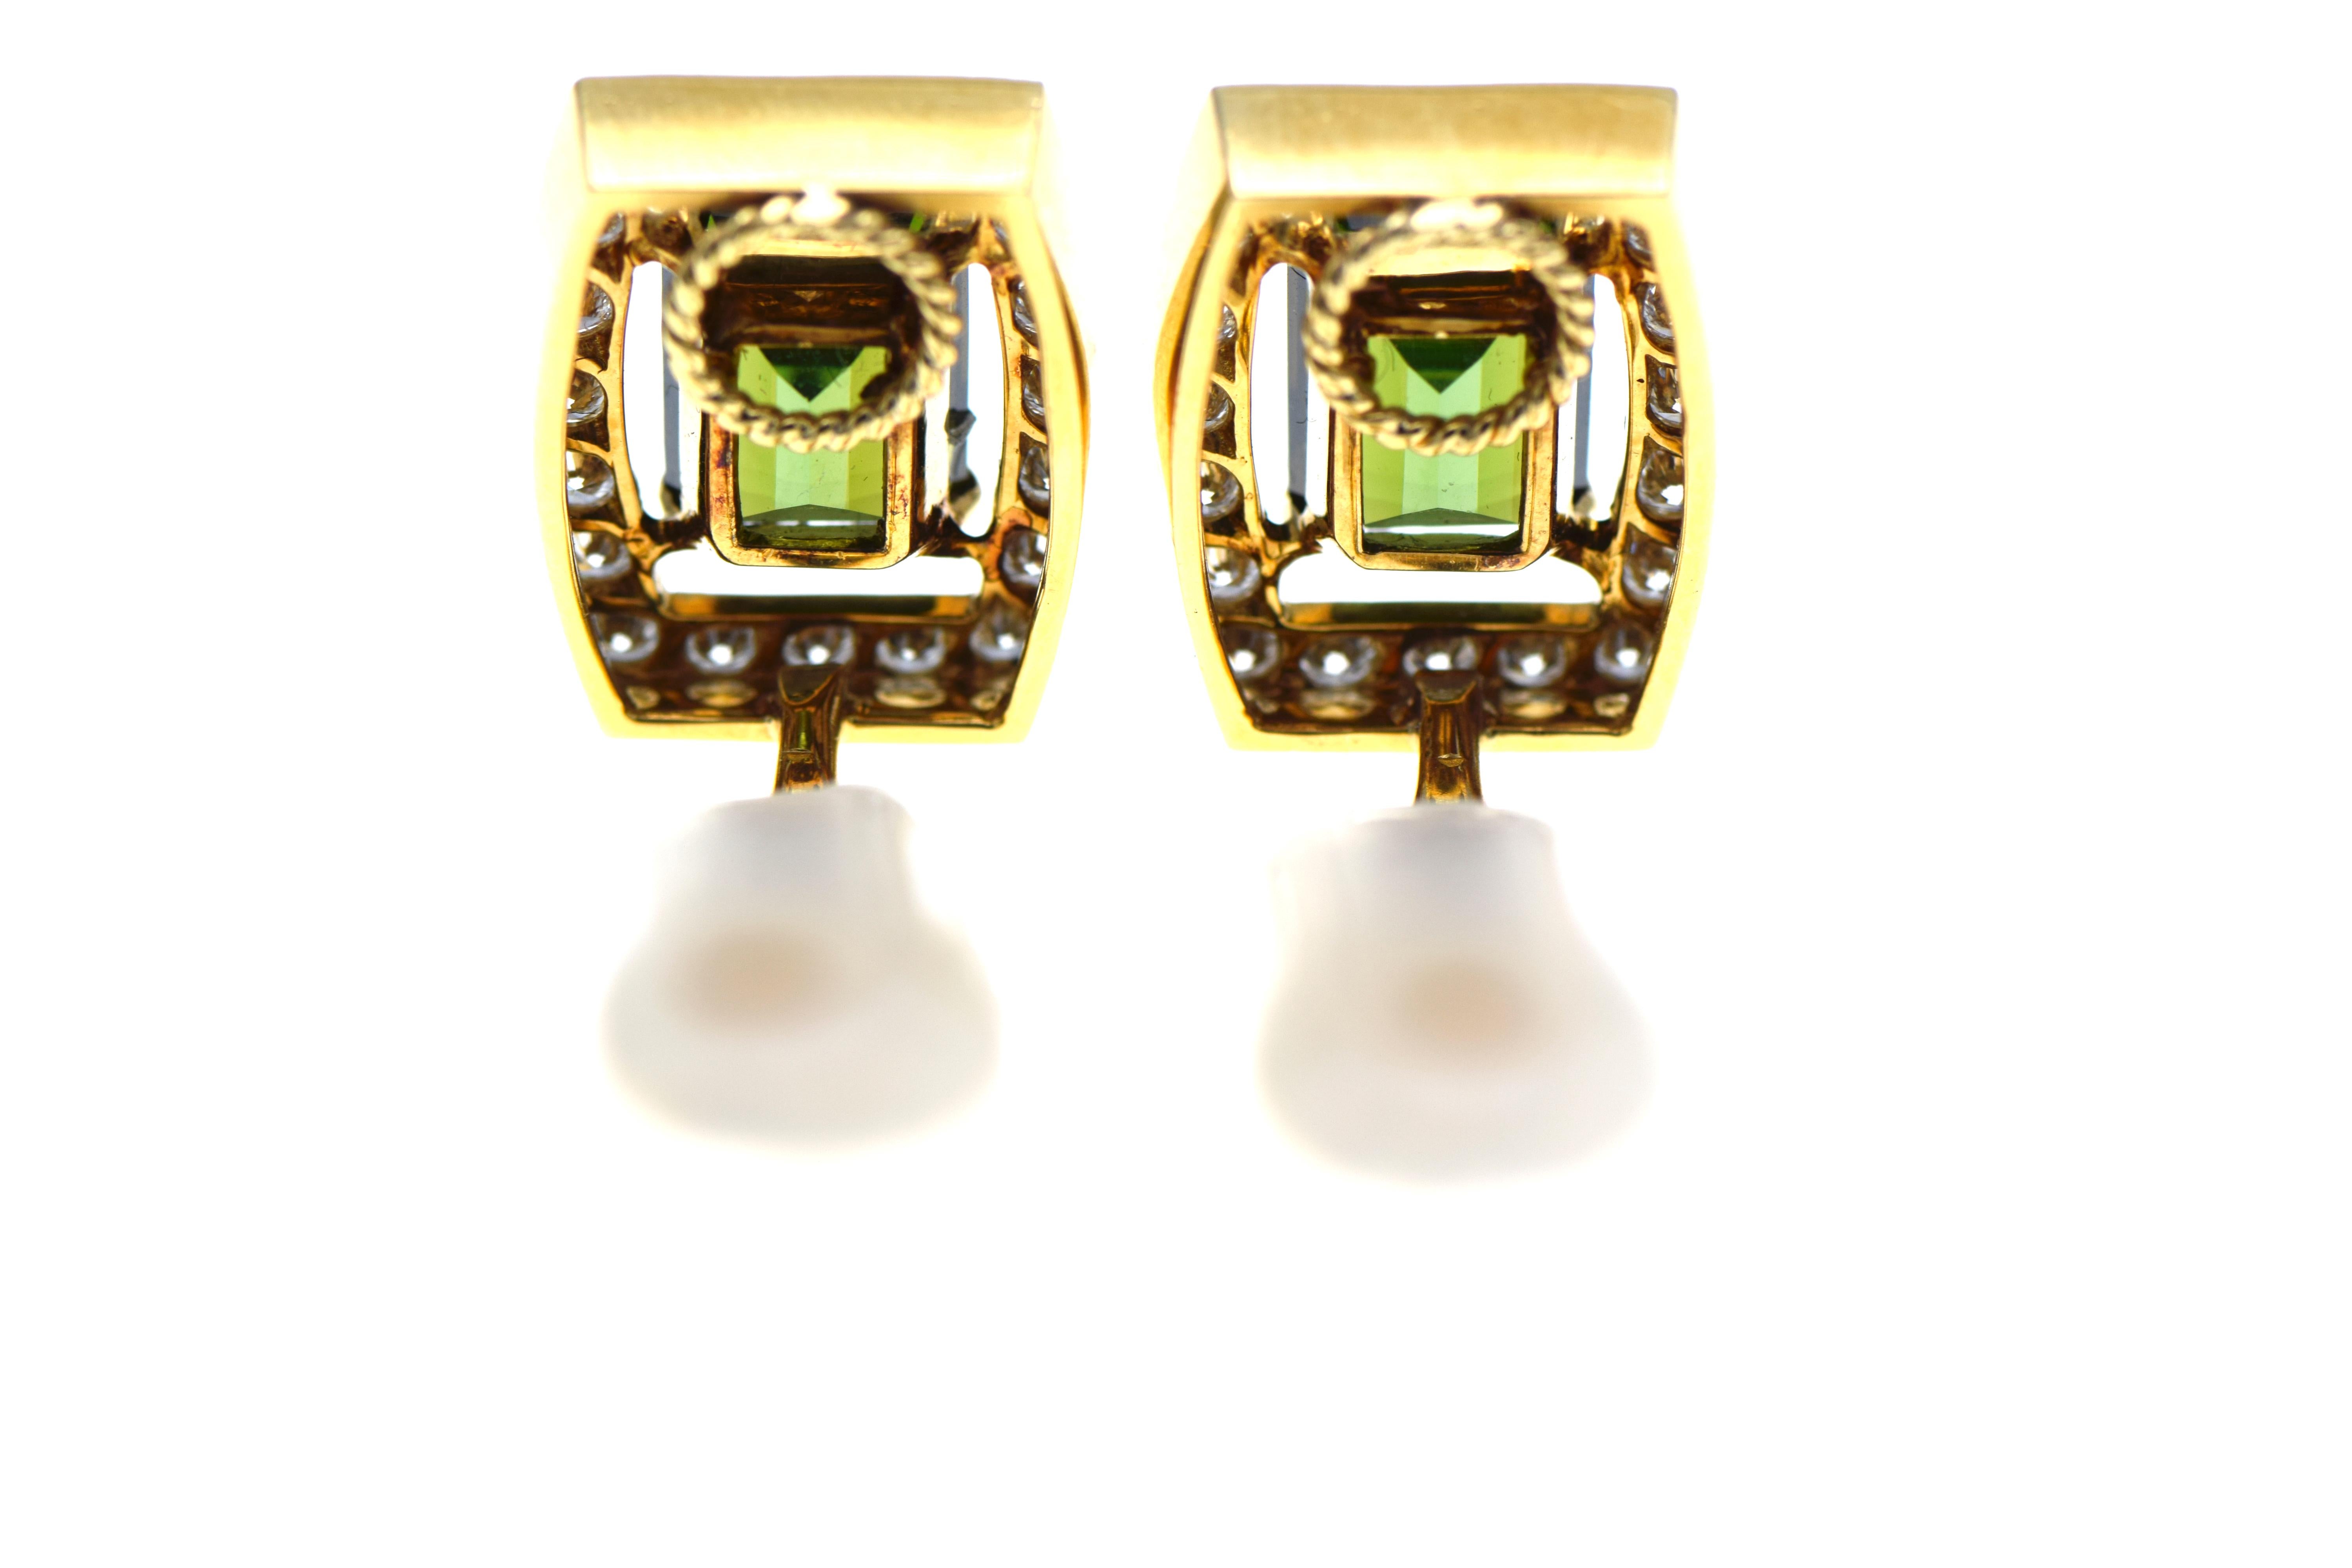 Pair of 18 karat Gold, Tourmaline and Diamond Earclips, David Webb featuring 2 emerald-cut Tourmalines approximately 8.00 carats, within bowed rectangular frames of 40 Round Brilliant Cut Diamonds approximately 2.25 carats, signed 